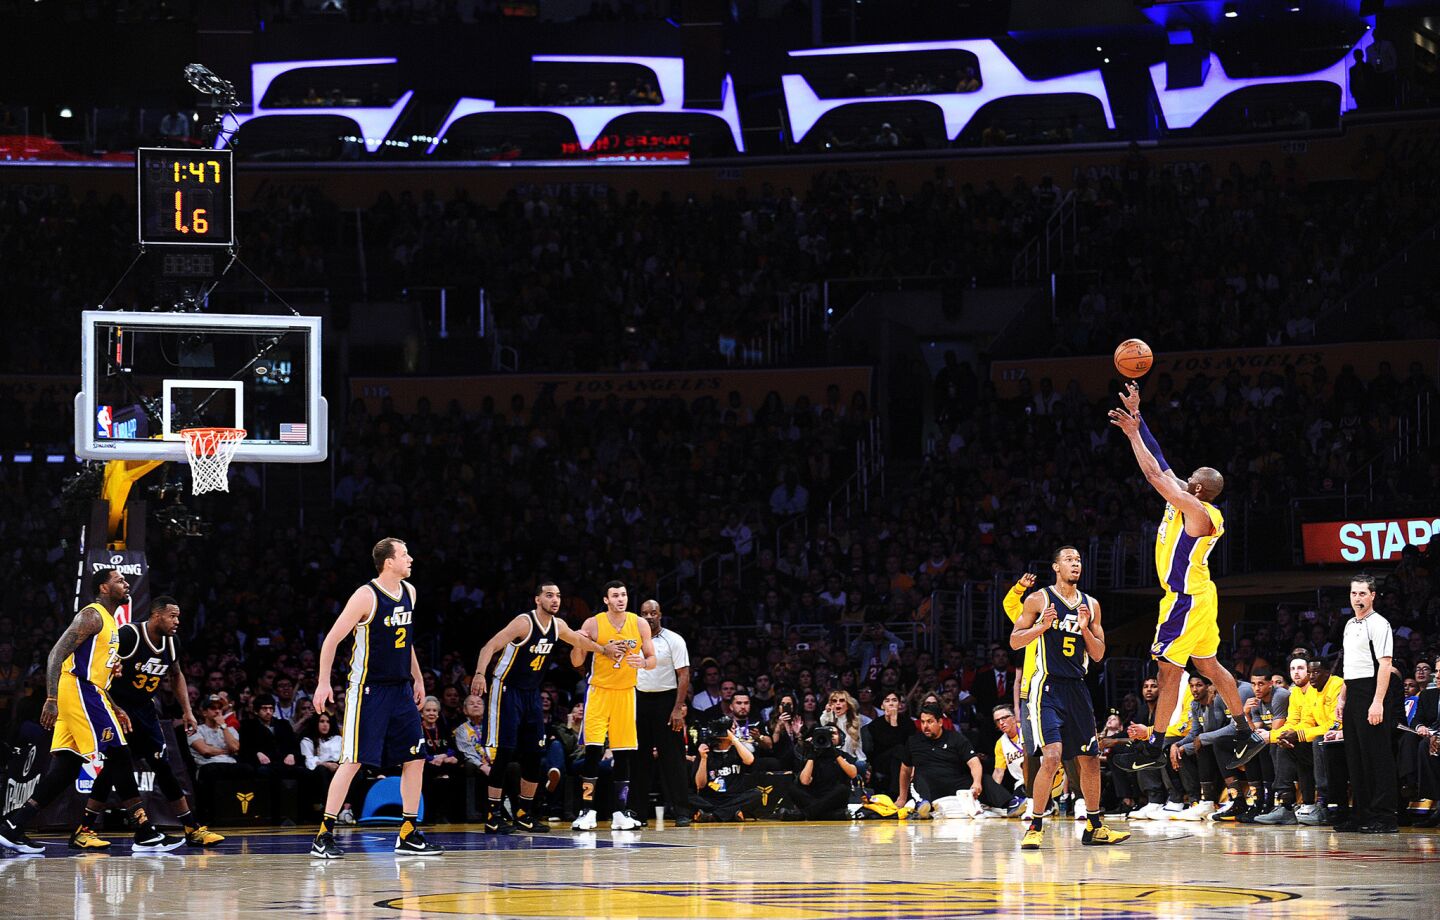 Kobe Bryant takes a shot in the first quarter of his final game at the Staples Center Wednesday.